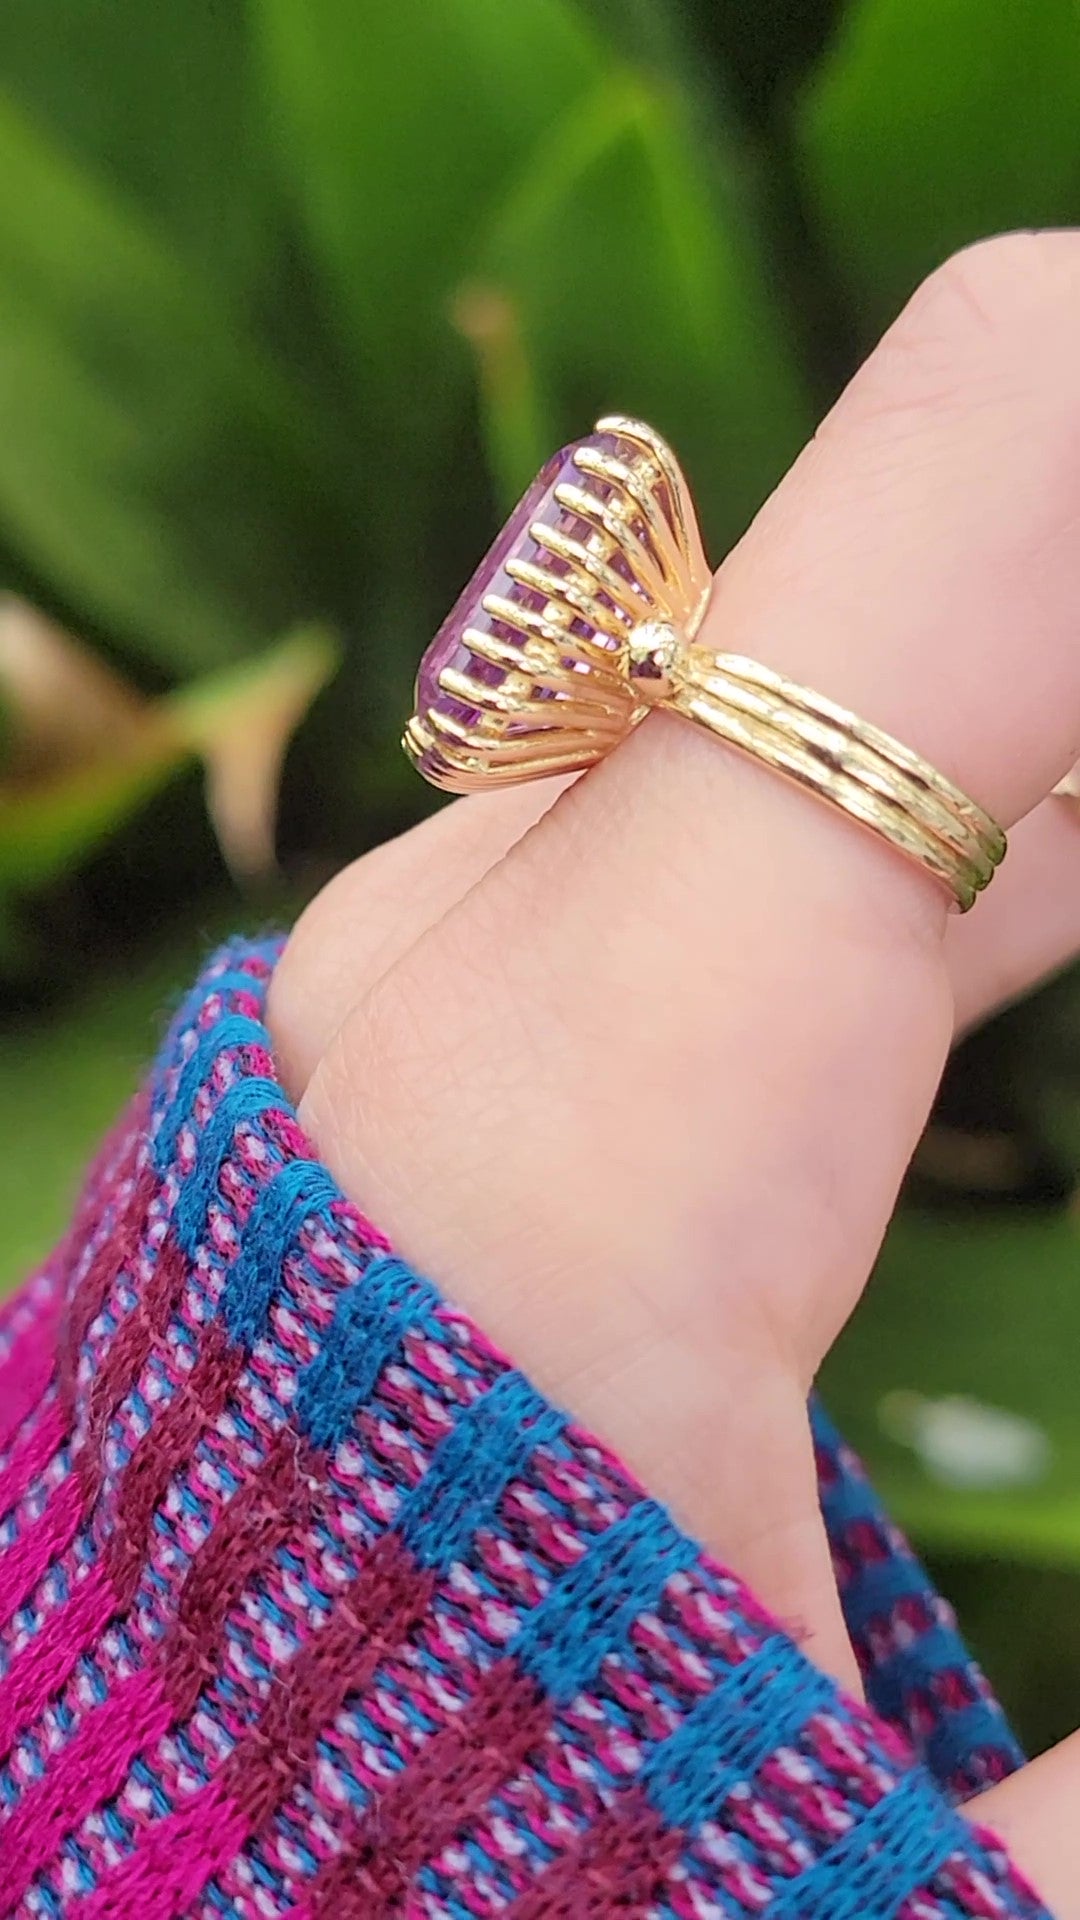 Stunning Vintage 14kt Gold and Amethyst Cocktail Ring